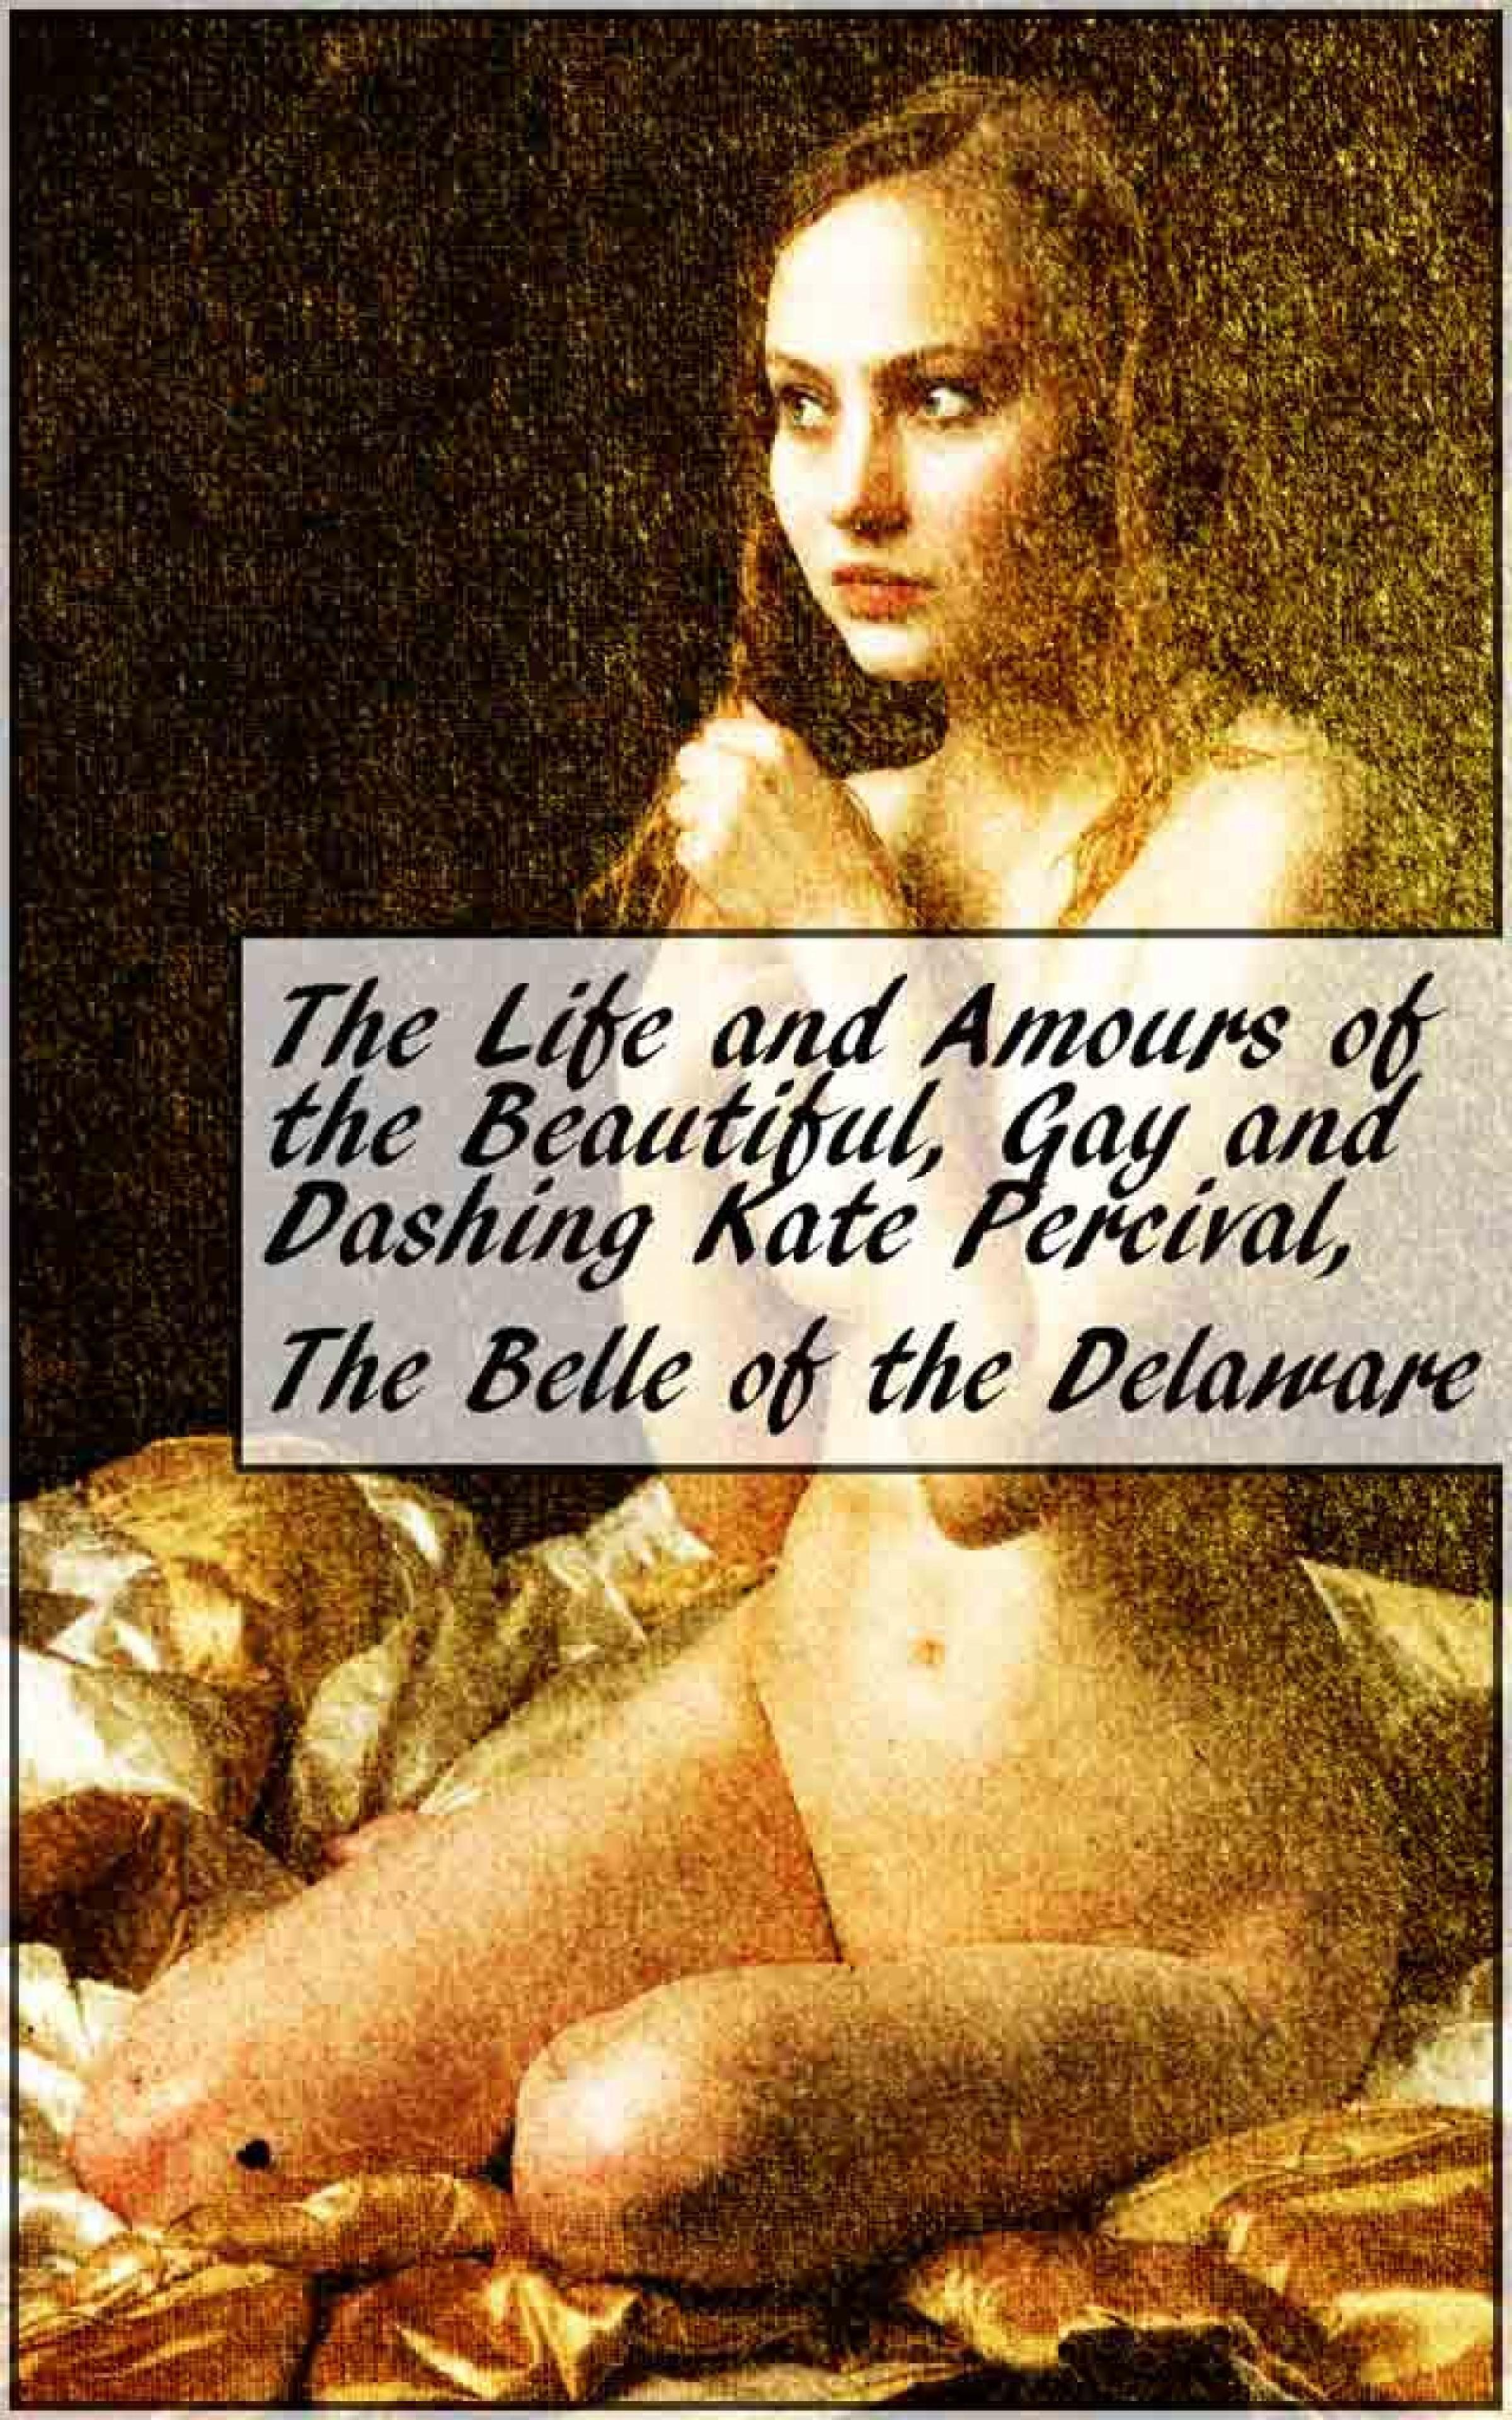 The Life and Amours of the Beautiful, Gay and Dashing Kate Percival, The  Belle of the Delaware, Kate Percival – скачать книгу fb2, epub, pdf на  ЛитРес